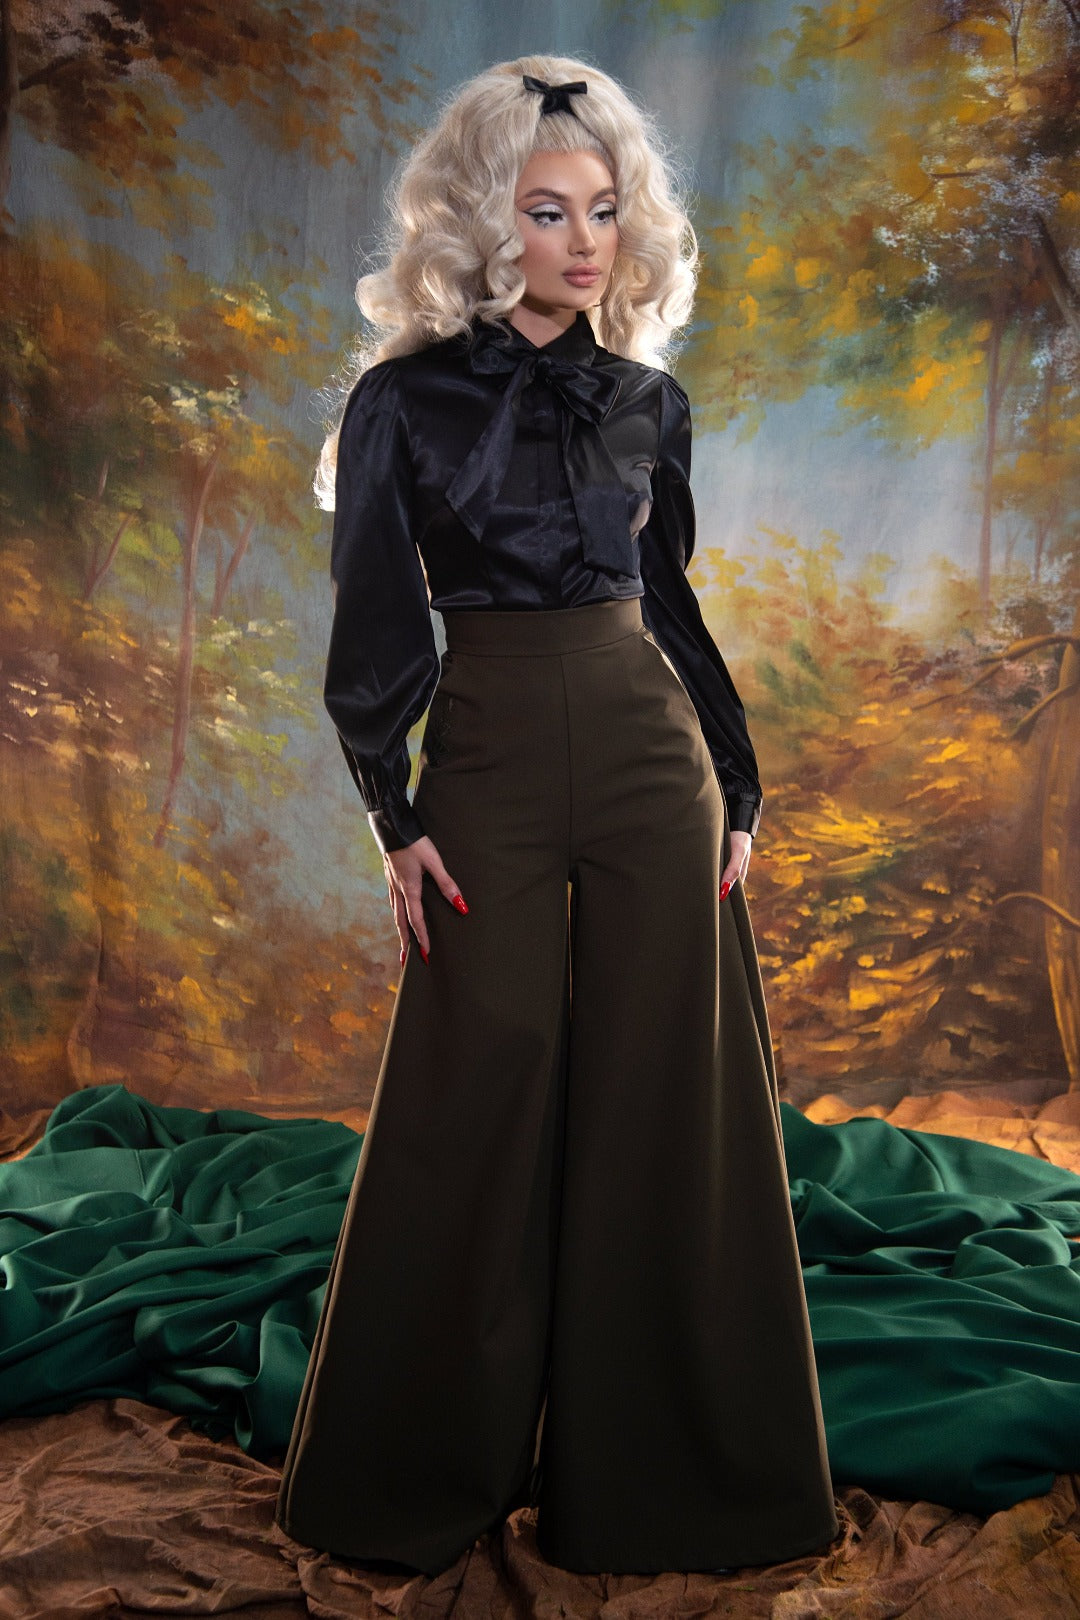 A blond pinup model posing against a yellow and blue painted background while wearing the Angela Blouse in black and brown wide-leg trousers.